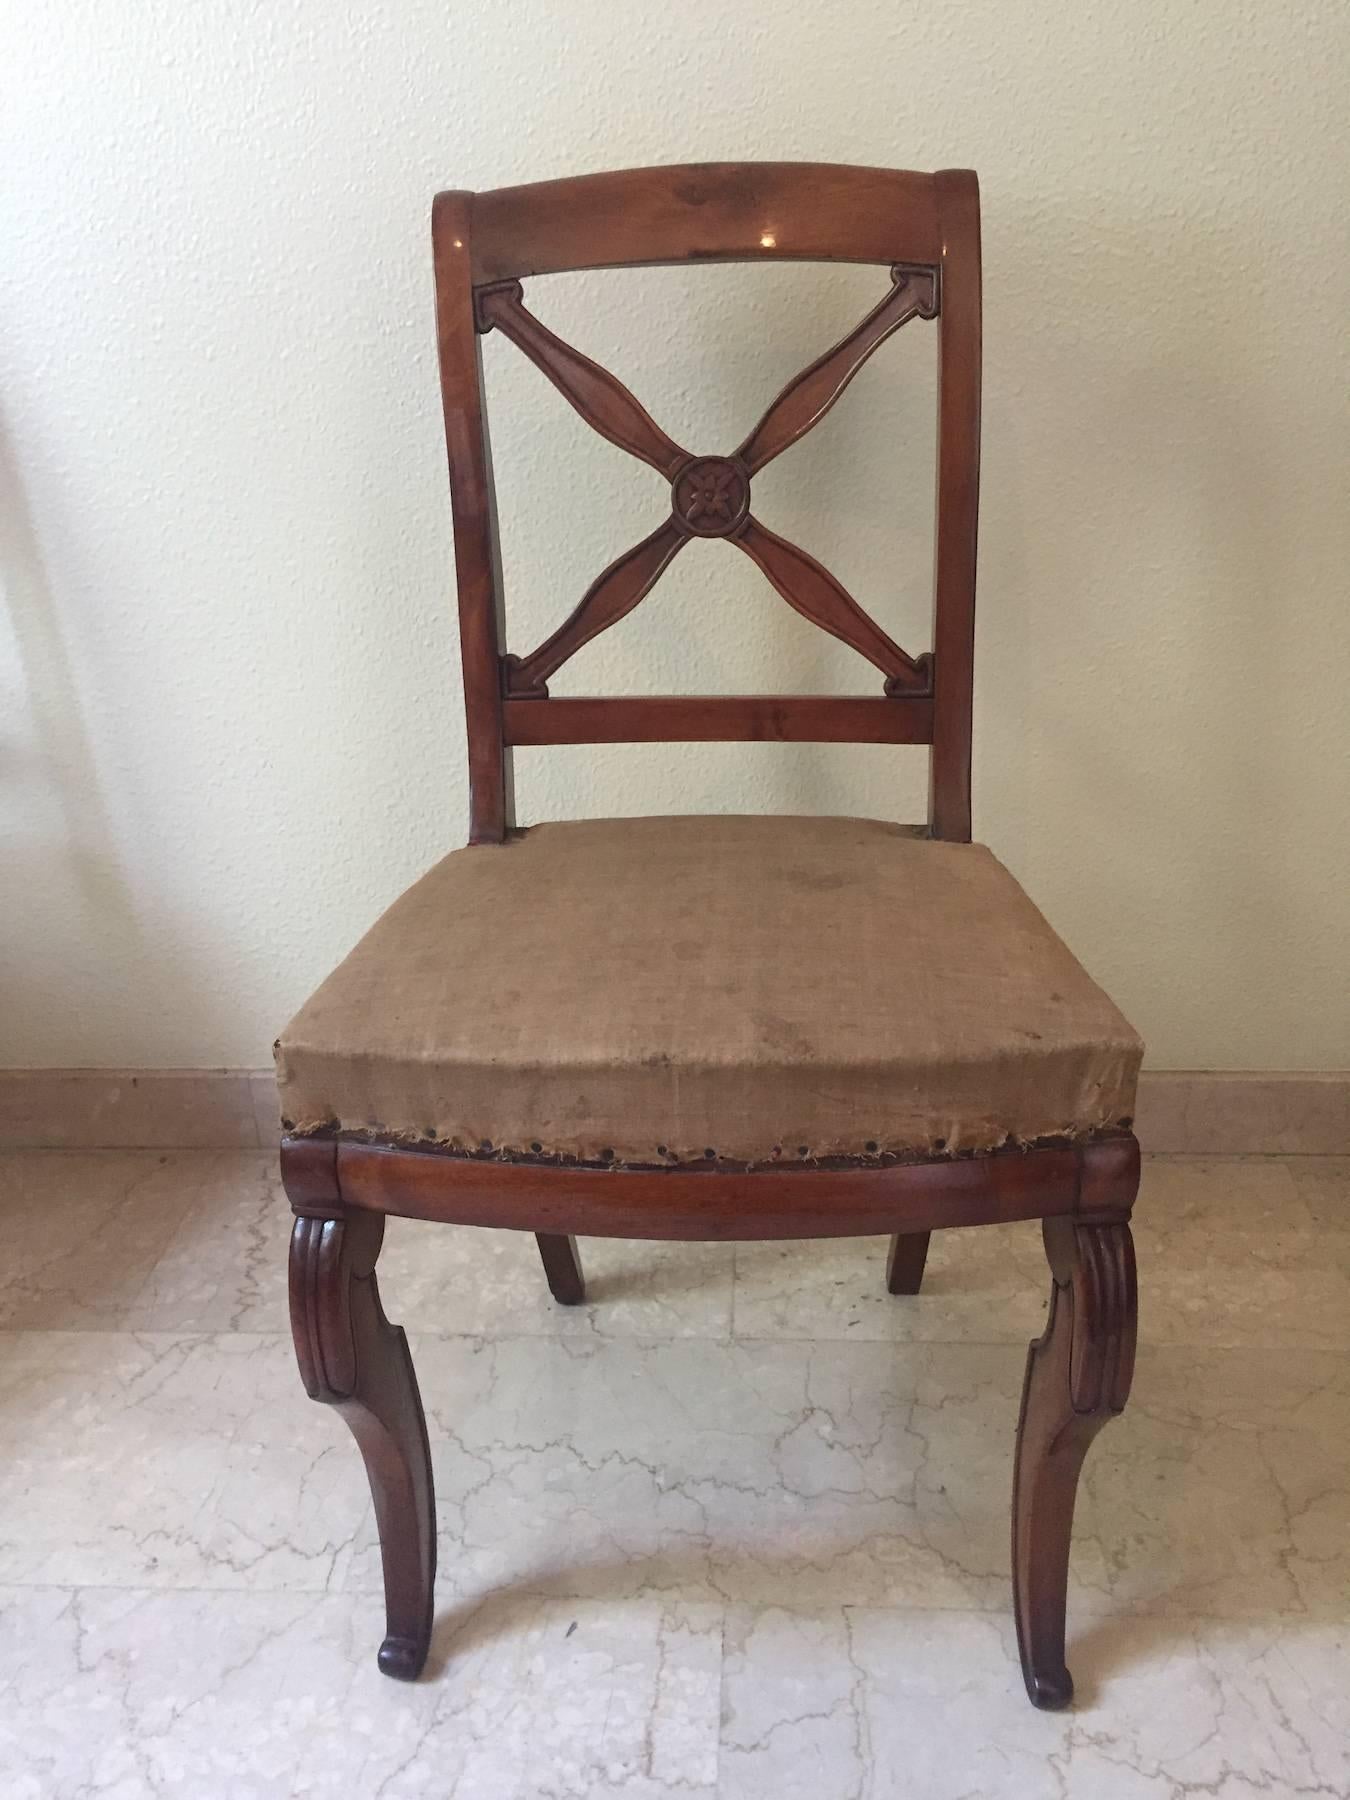 Beautiful  chairs in walnut with cross decorated backs and a flower in the centre, splendid front legs with sublime sculptures, sabre shaped back legs perfectly restored, they still have their original padding.Great executive quality ,they can be